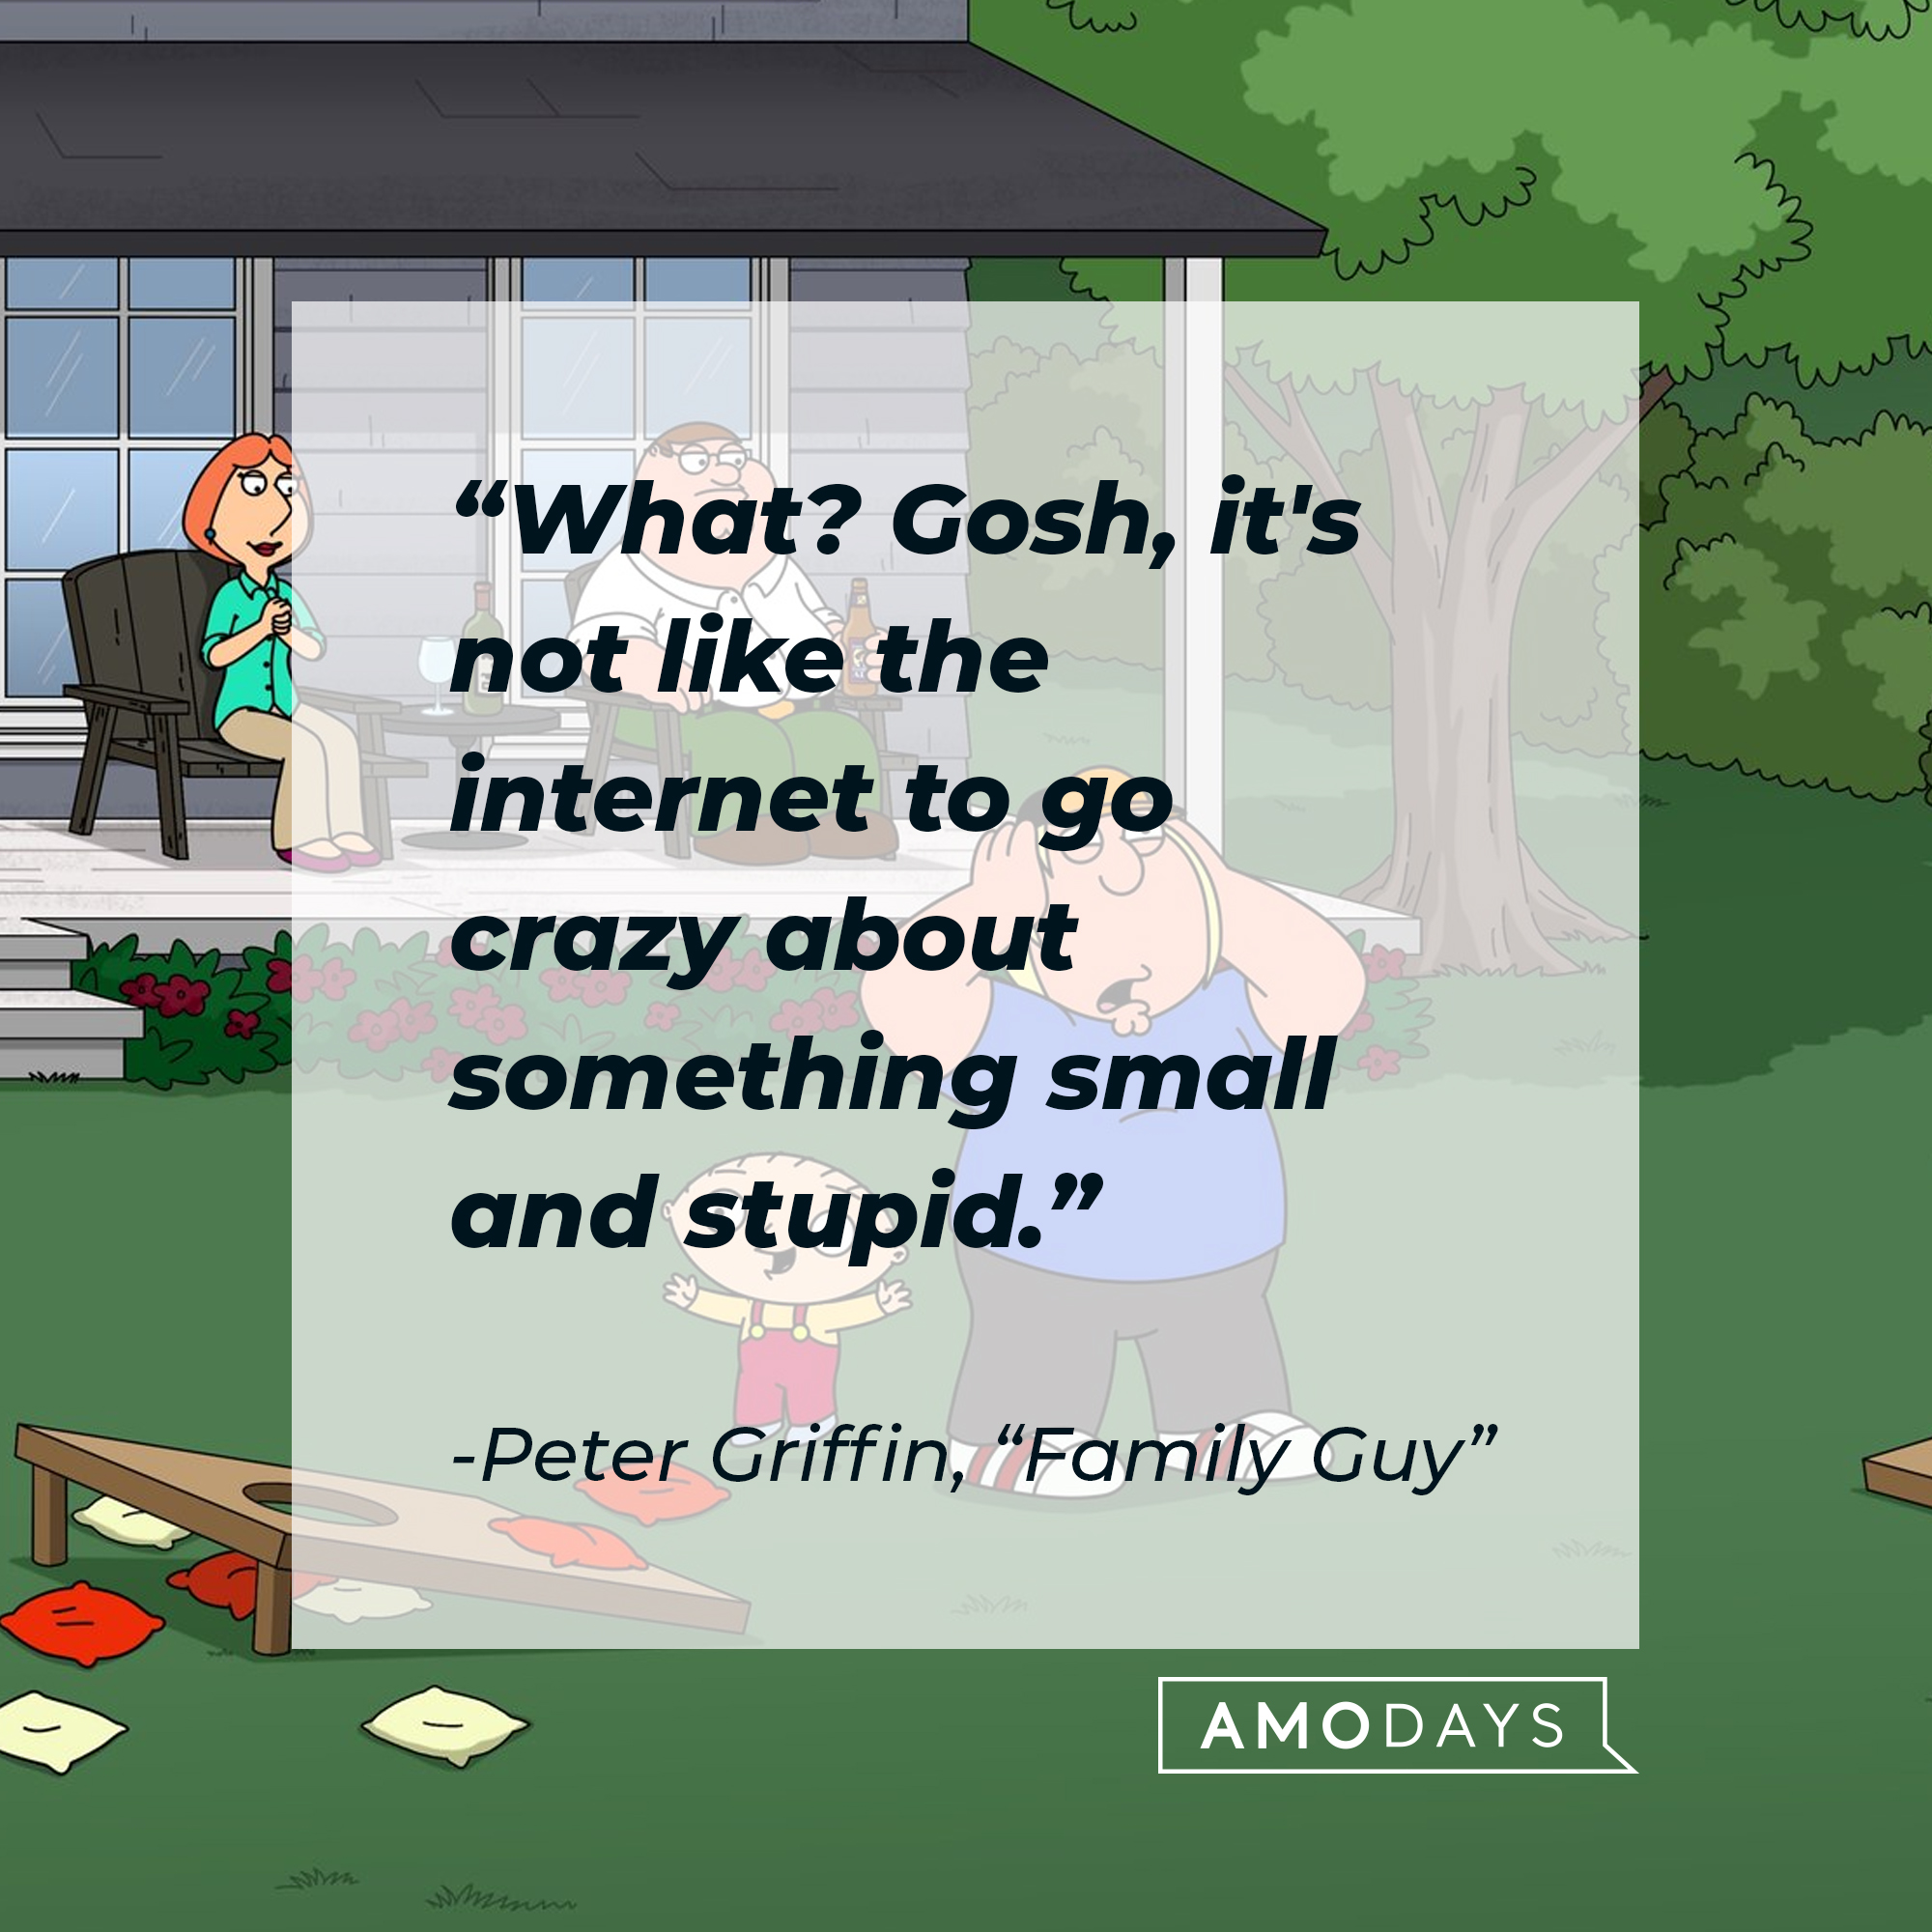 Peter Griffin's quote: "What? Gosh, it's not like the internet to go crazy about something small and stupid." | Source: facebook.com/FamilyGuy